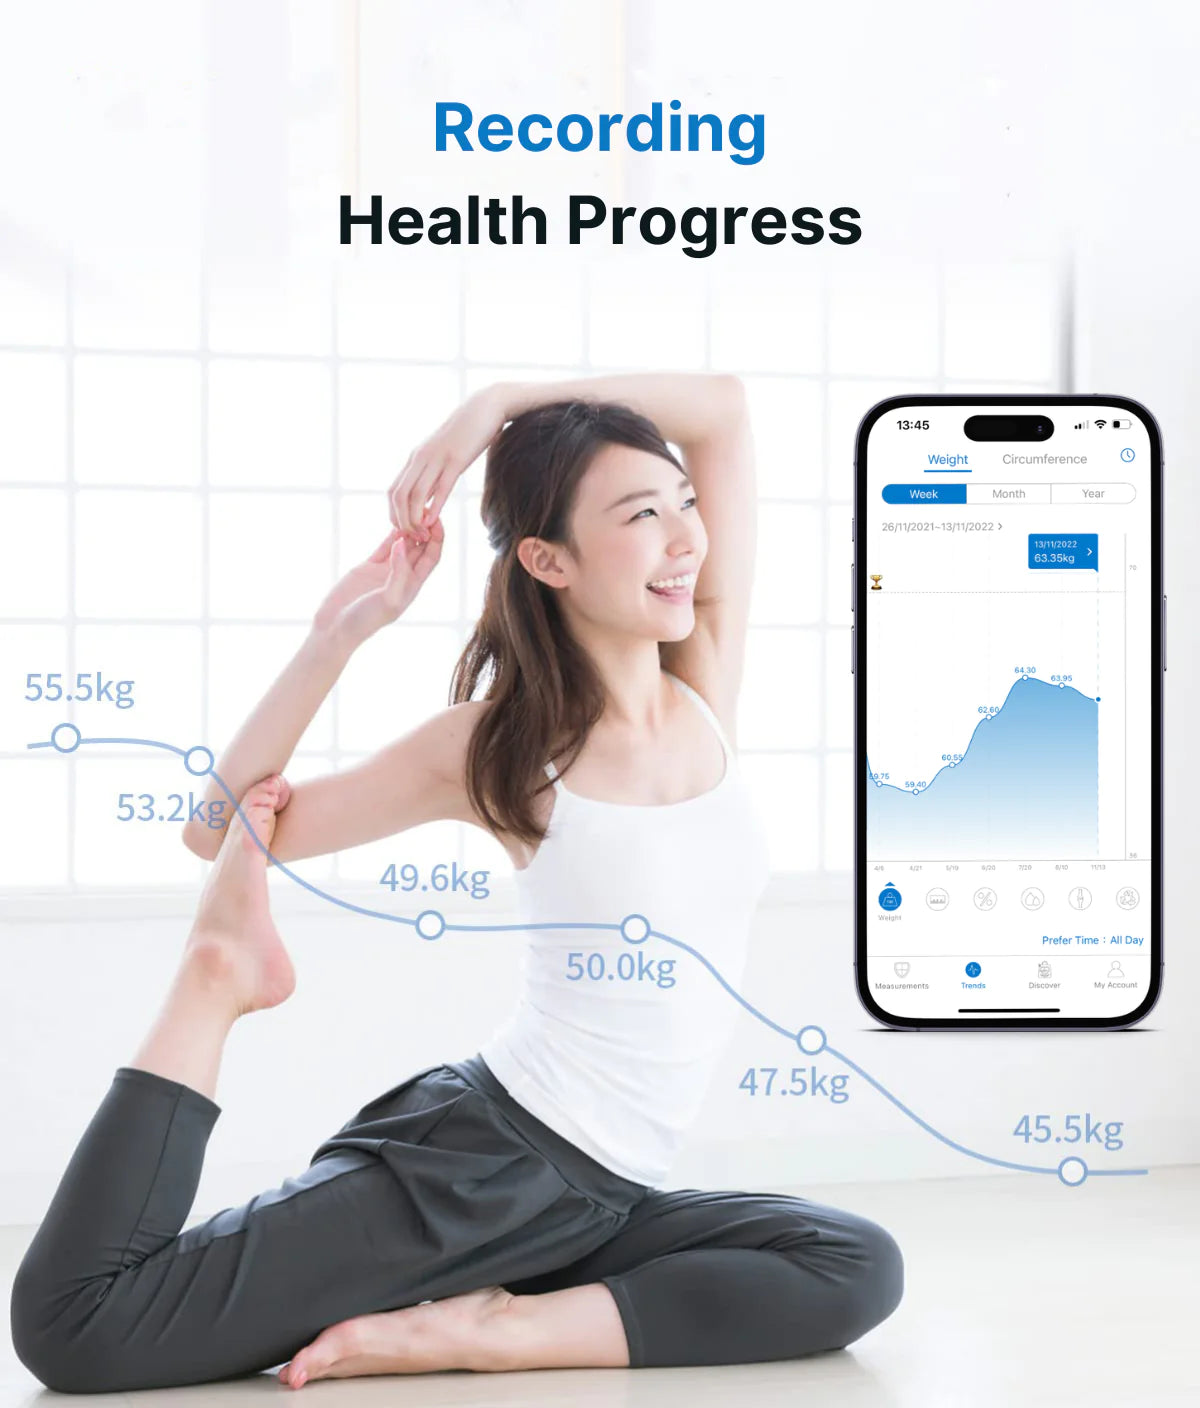 A young woman in sportswear performs a yoga pose on a mat in a bright room, while smiling and stretching her arm. Next to her, a graphic of a Elis Solar Smart Body Scale by Renpho EU displays a wellness app tracking.